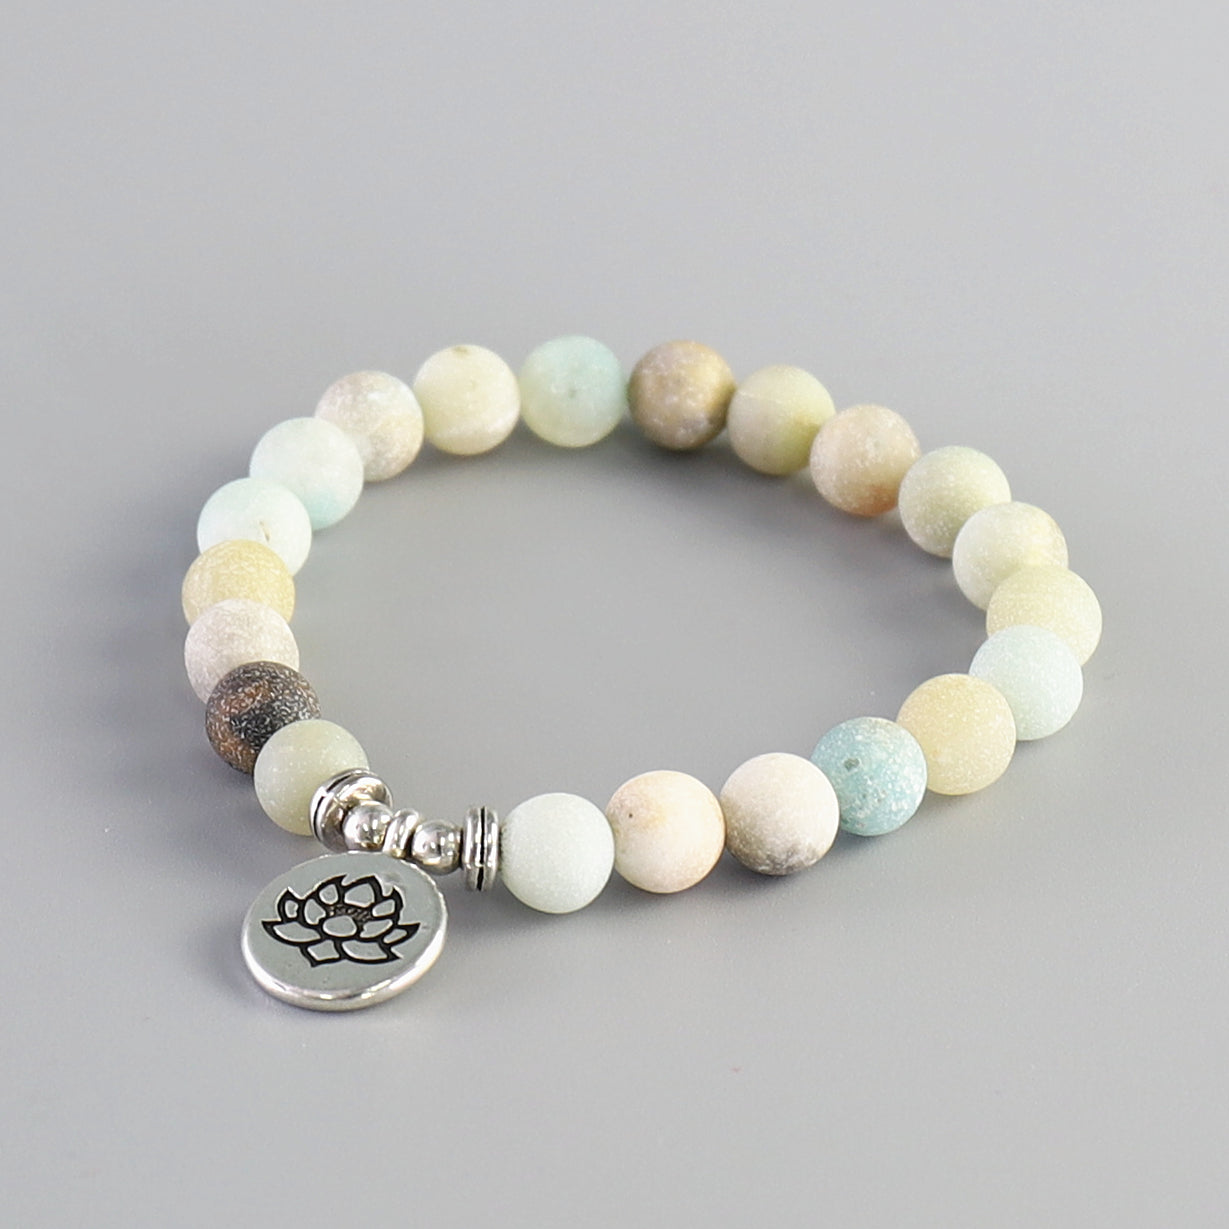 Buddhist Handcrafted Nature Sandalwood Bracelet for "Purity & stillness of the body, speech, & mind" - Made of Amazonite Blessed Beads